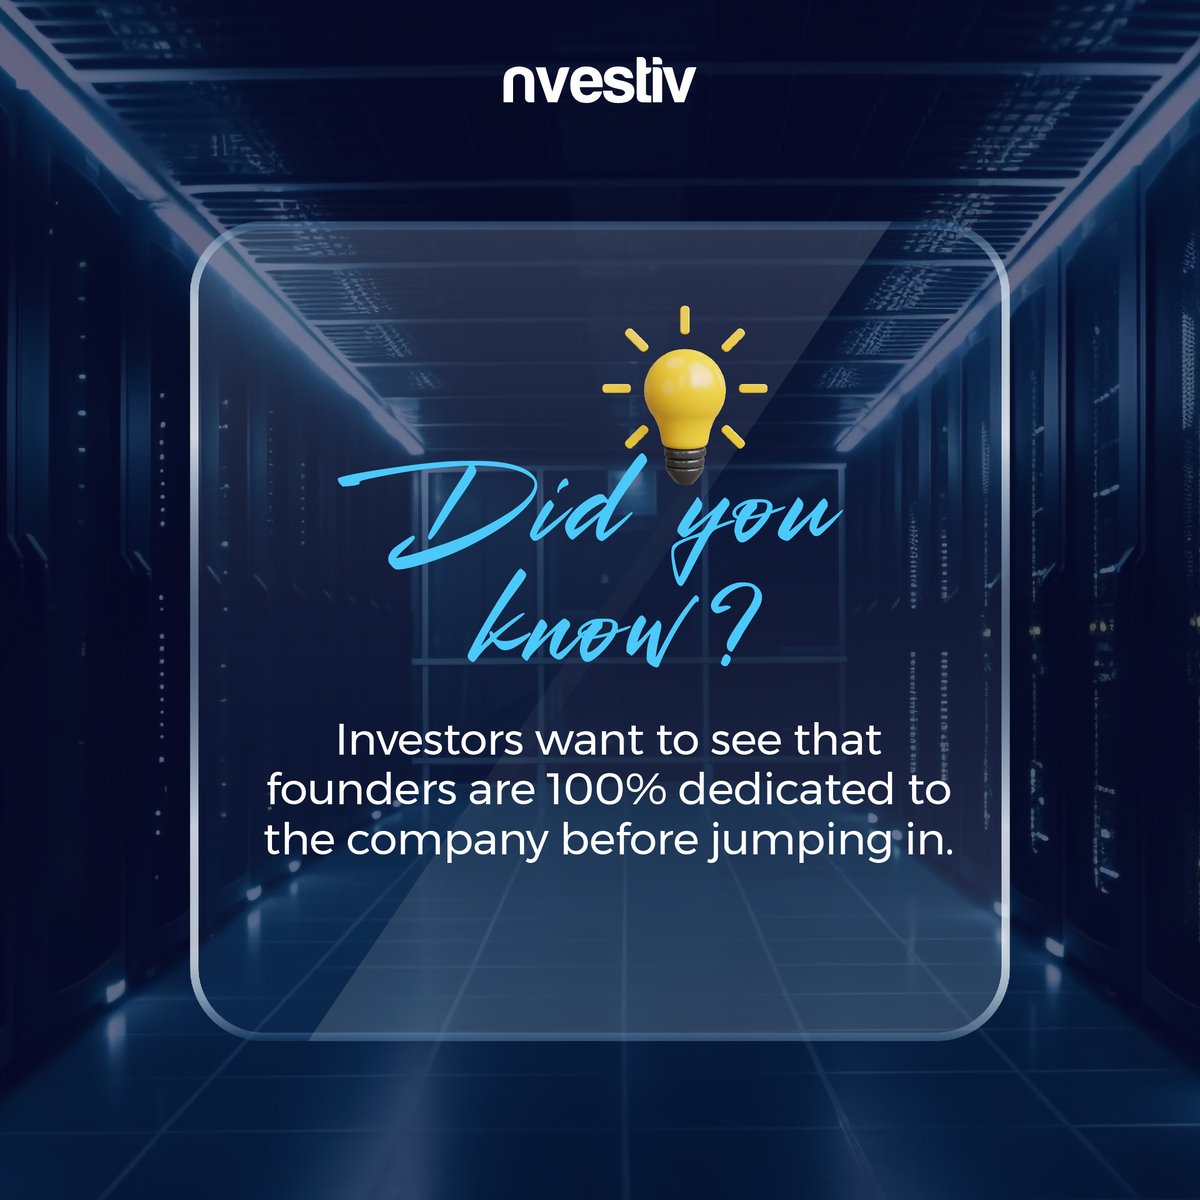 At nvestiv, we're dedicated to empowering founders and investors alike. Dive into our world of innovative solutions and unparalleled expertise, where a commitment to excellence drives every decision.
#investmentrevolution #investors #capitalraising #nvestiv #everybodyknowsnvestiv